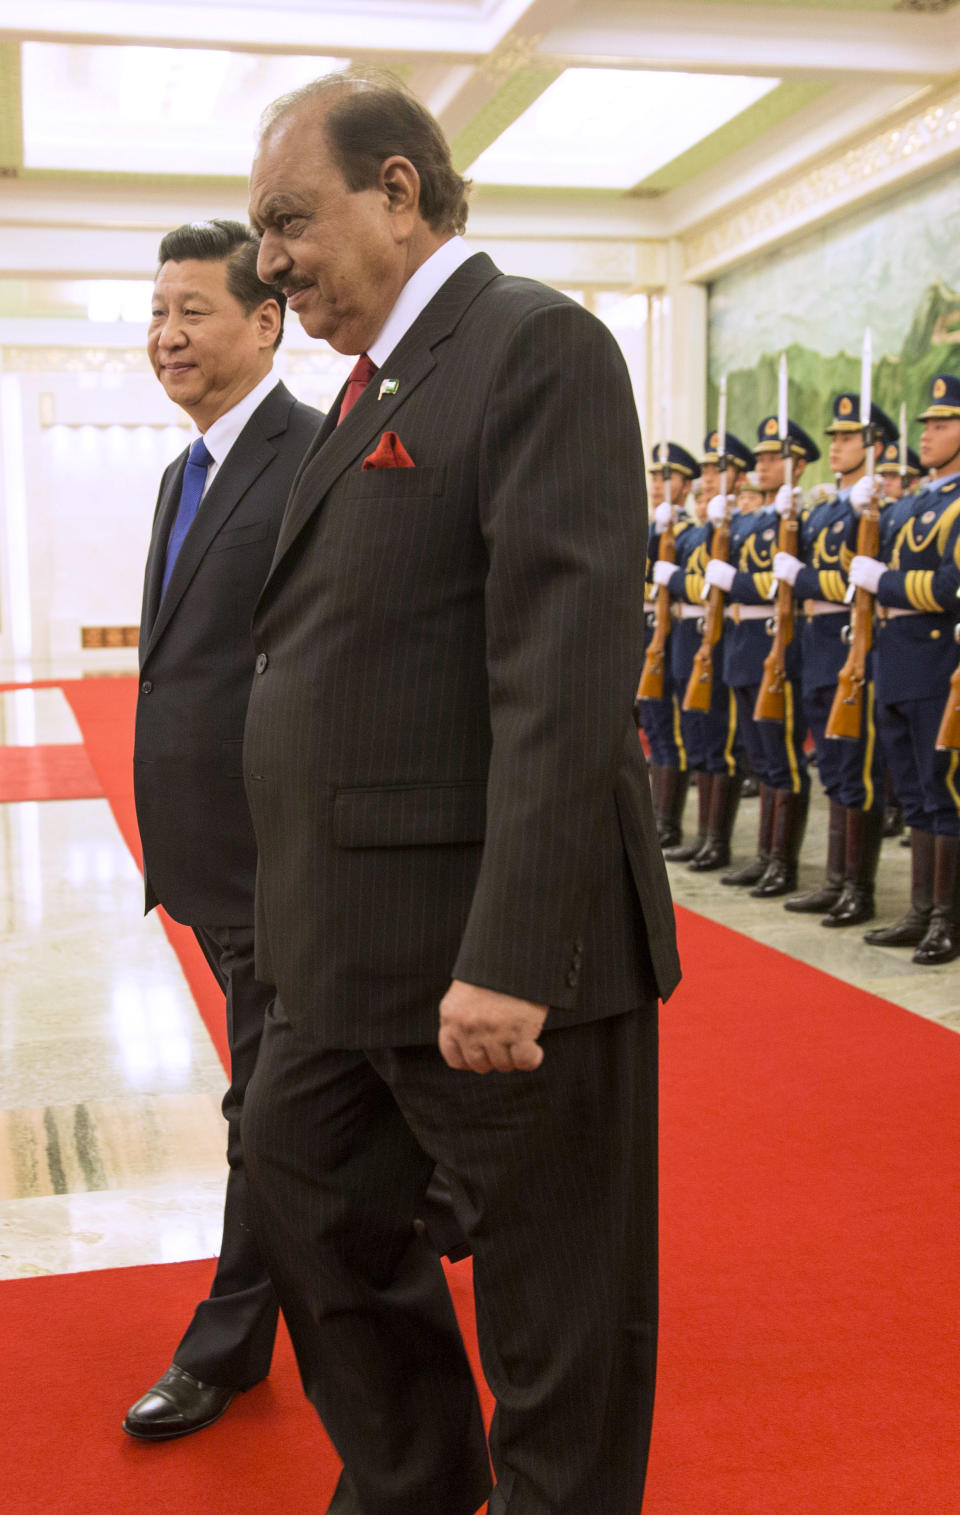 Pakistan's President Mamnoon Hussain, right, attends a welcoming ceremony with Chinese President Xi Jinping at the Great Hall of the People in Beijing, China, Wednesday, Feb. 19, 2014. Pakistani President Hussain is scheduled to meet Chinese leaders on a visit to Beijing focused on winning assistance for his country's ailing economy. (AP Photo/Adrian Bradshaw, Pool)